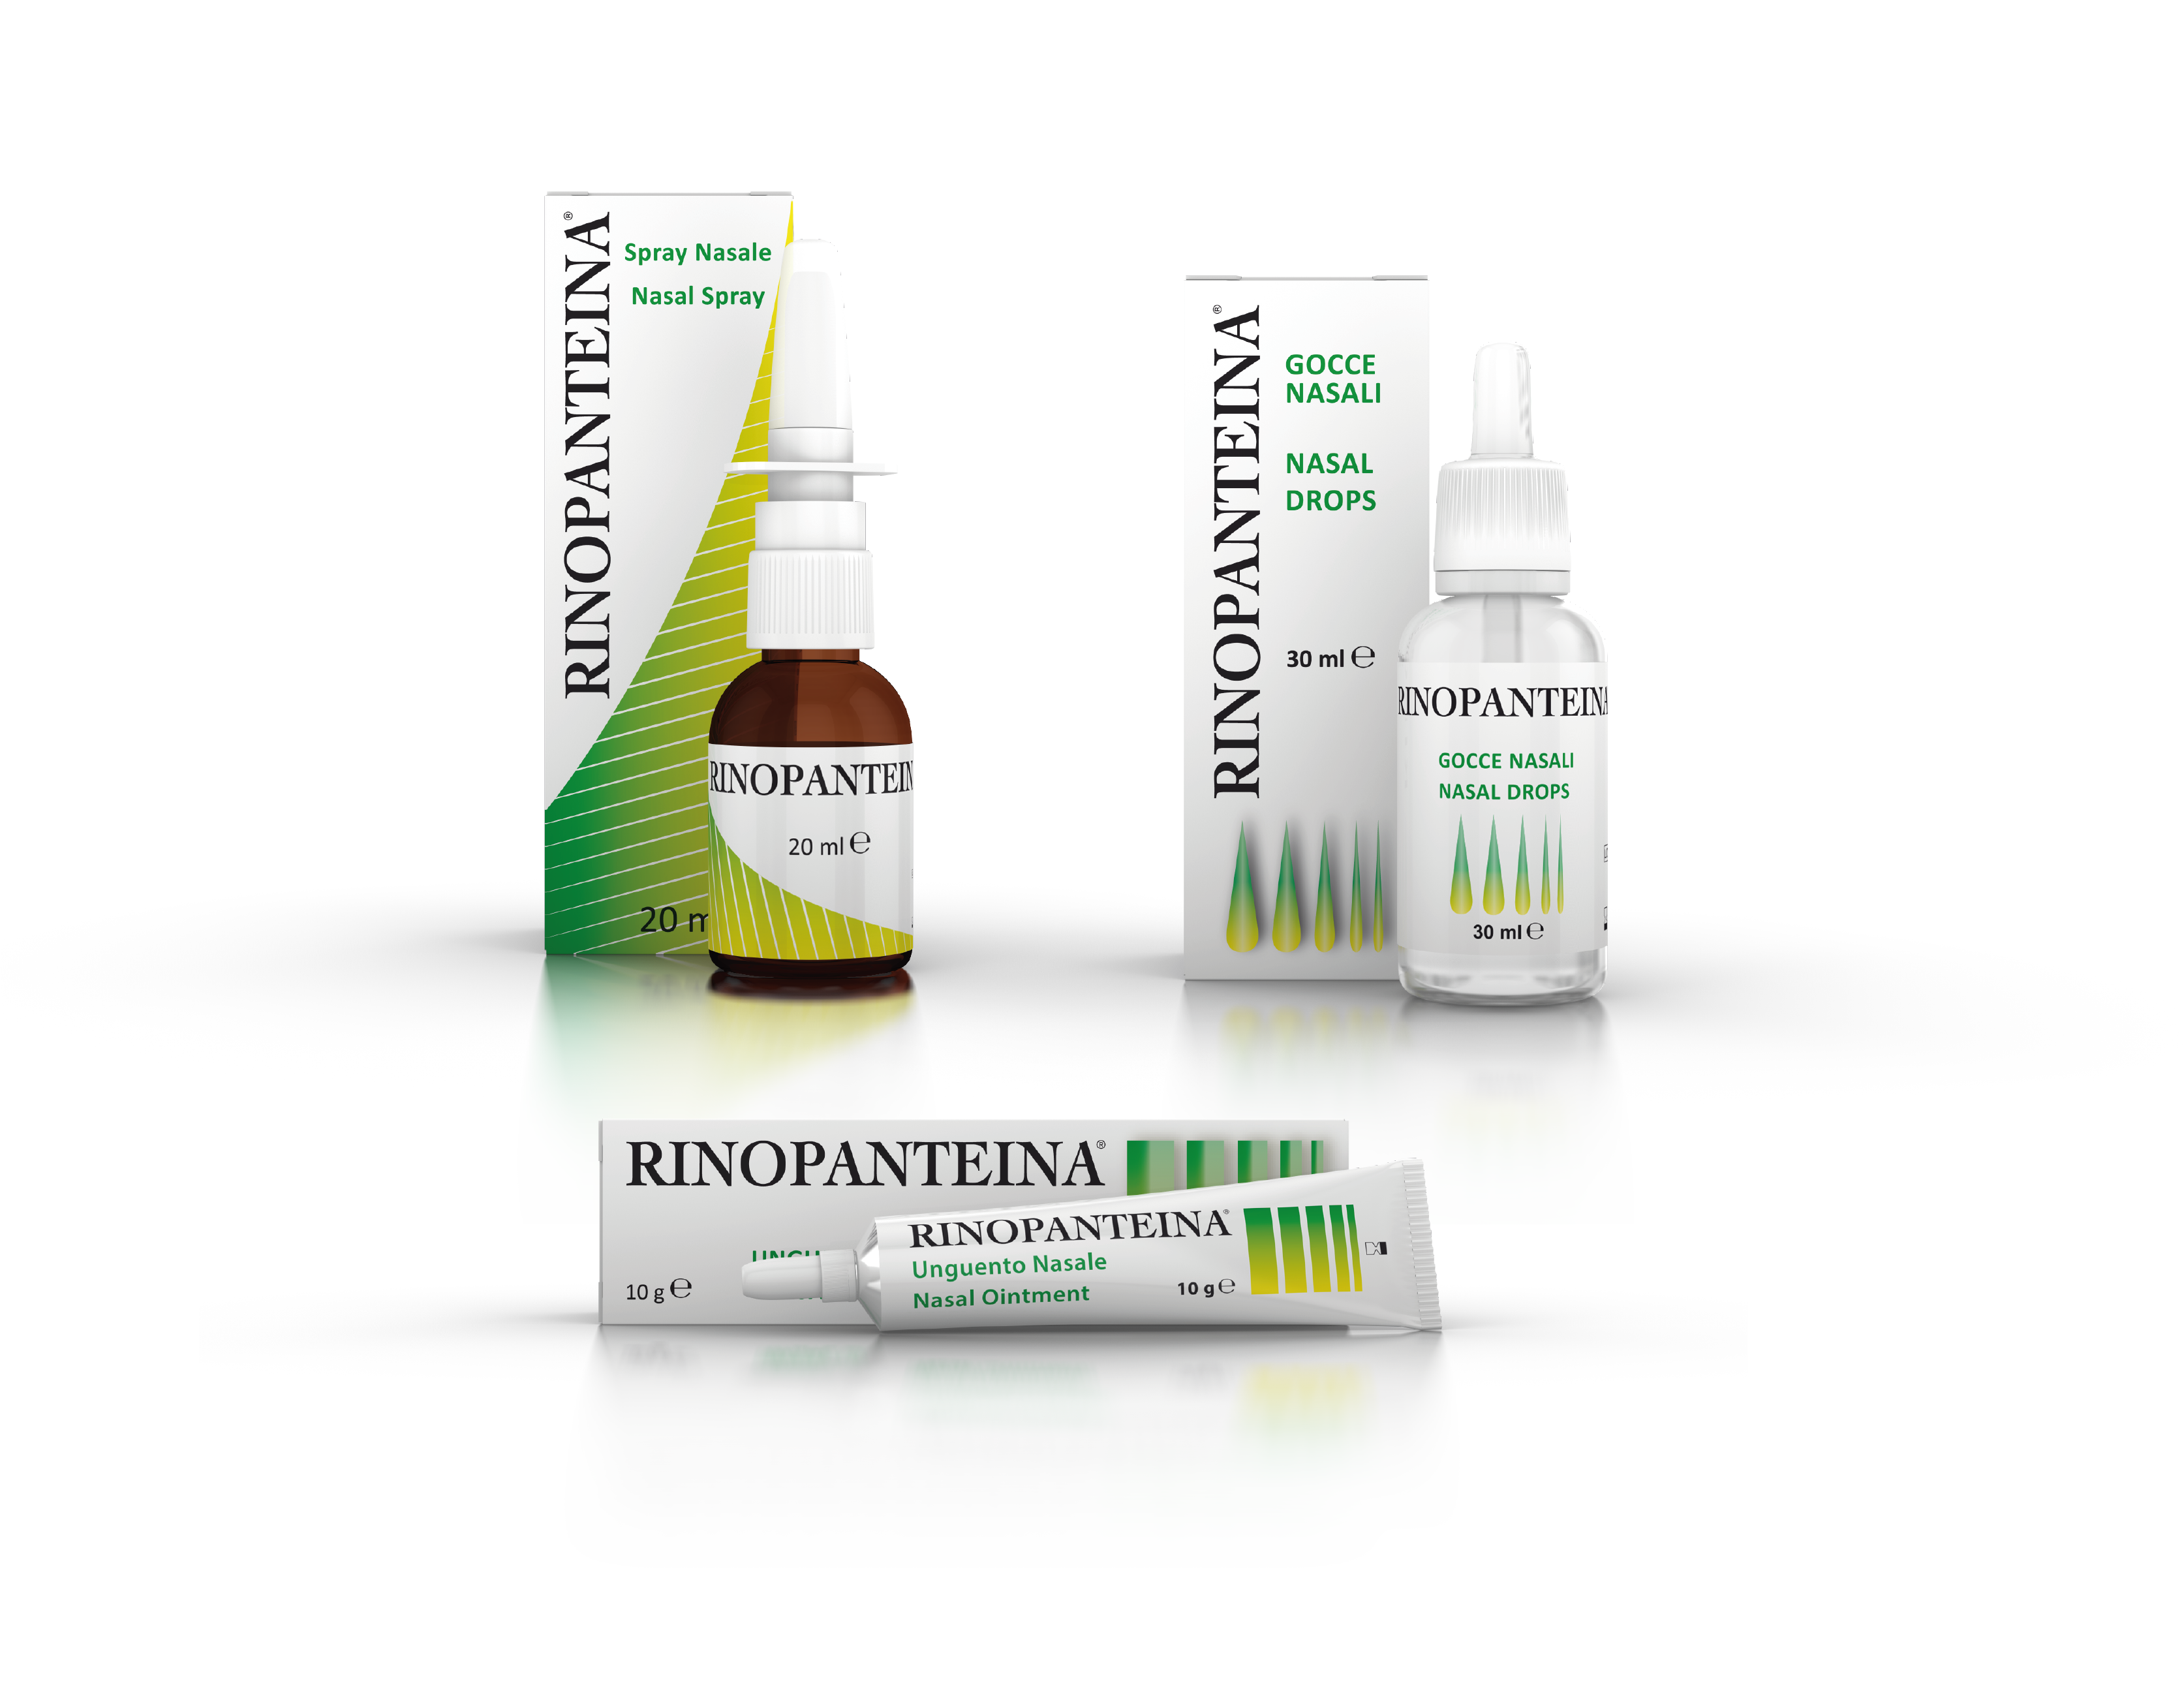 RINOPANTEINA LINE - A Line for the Lubrication of Nasal Mucosa